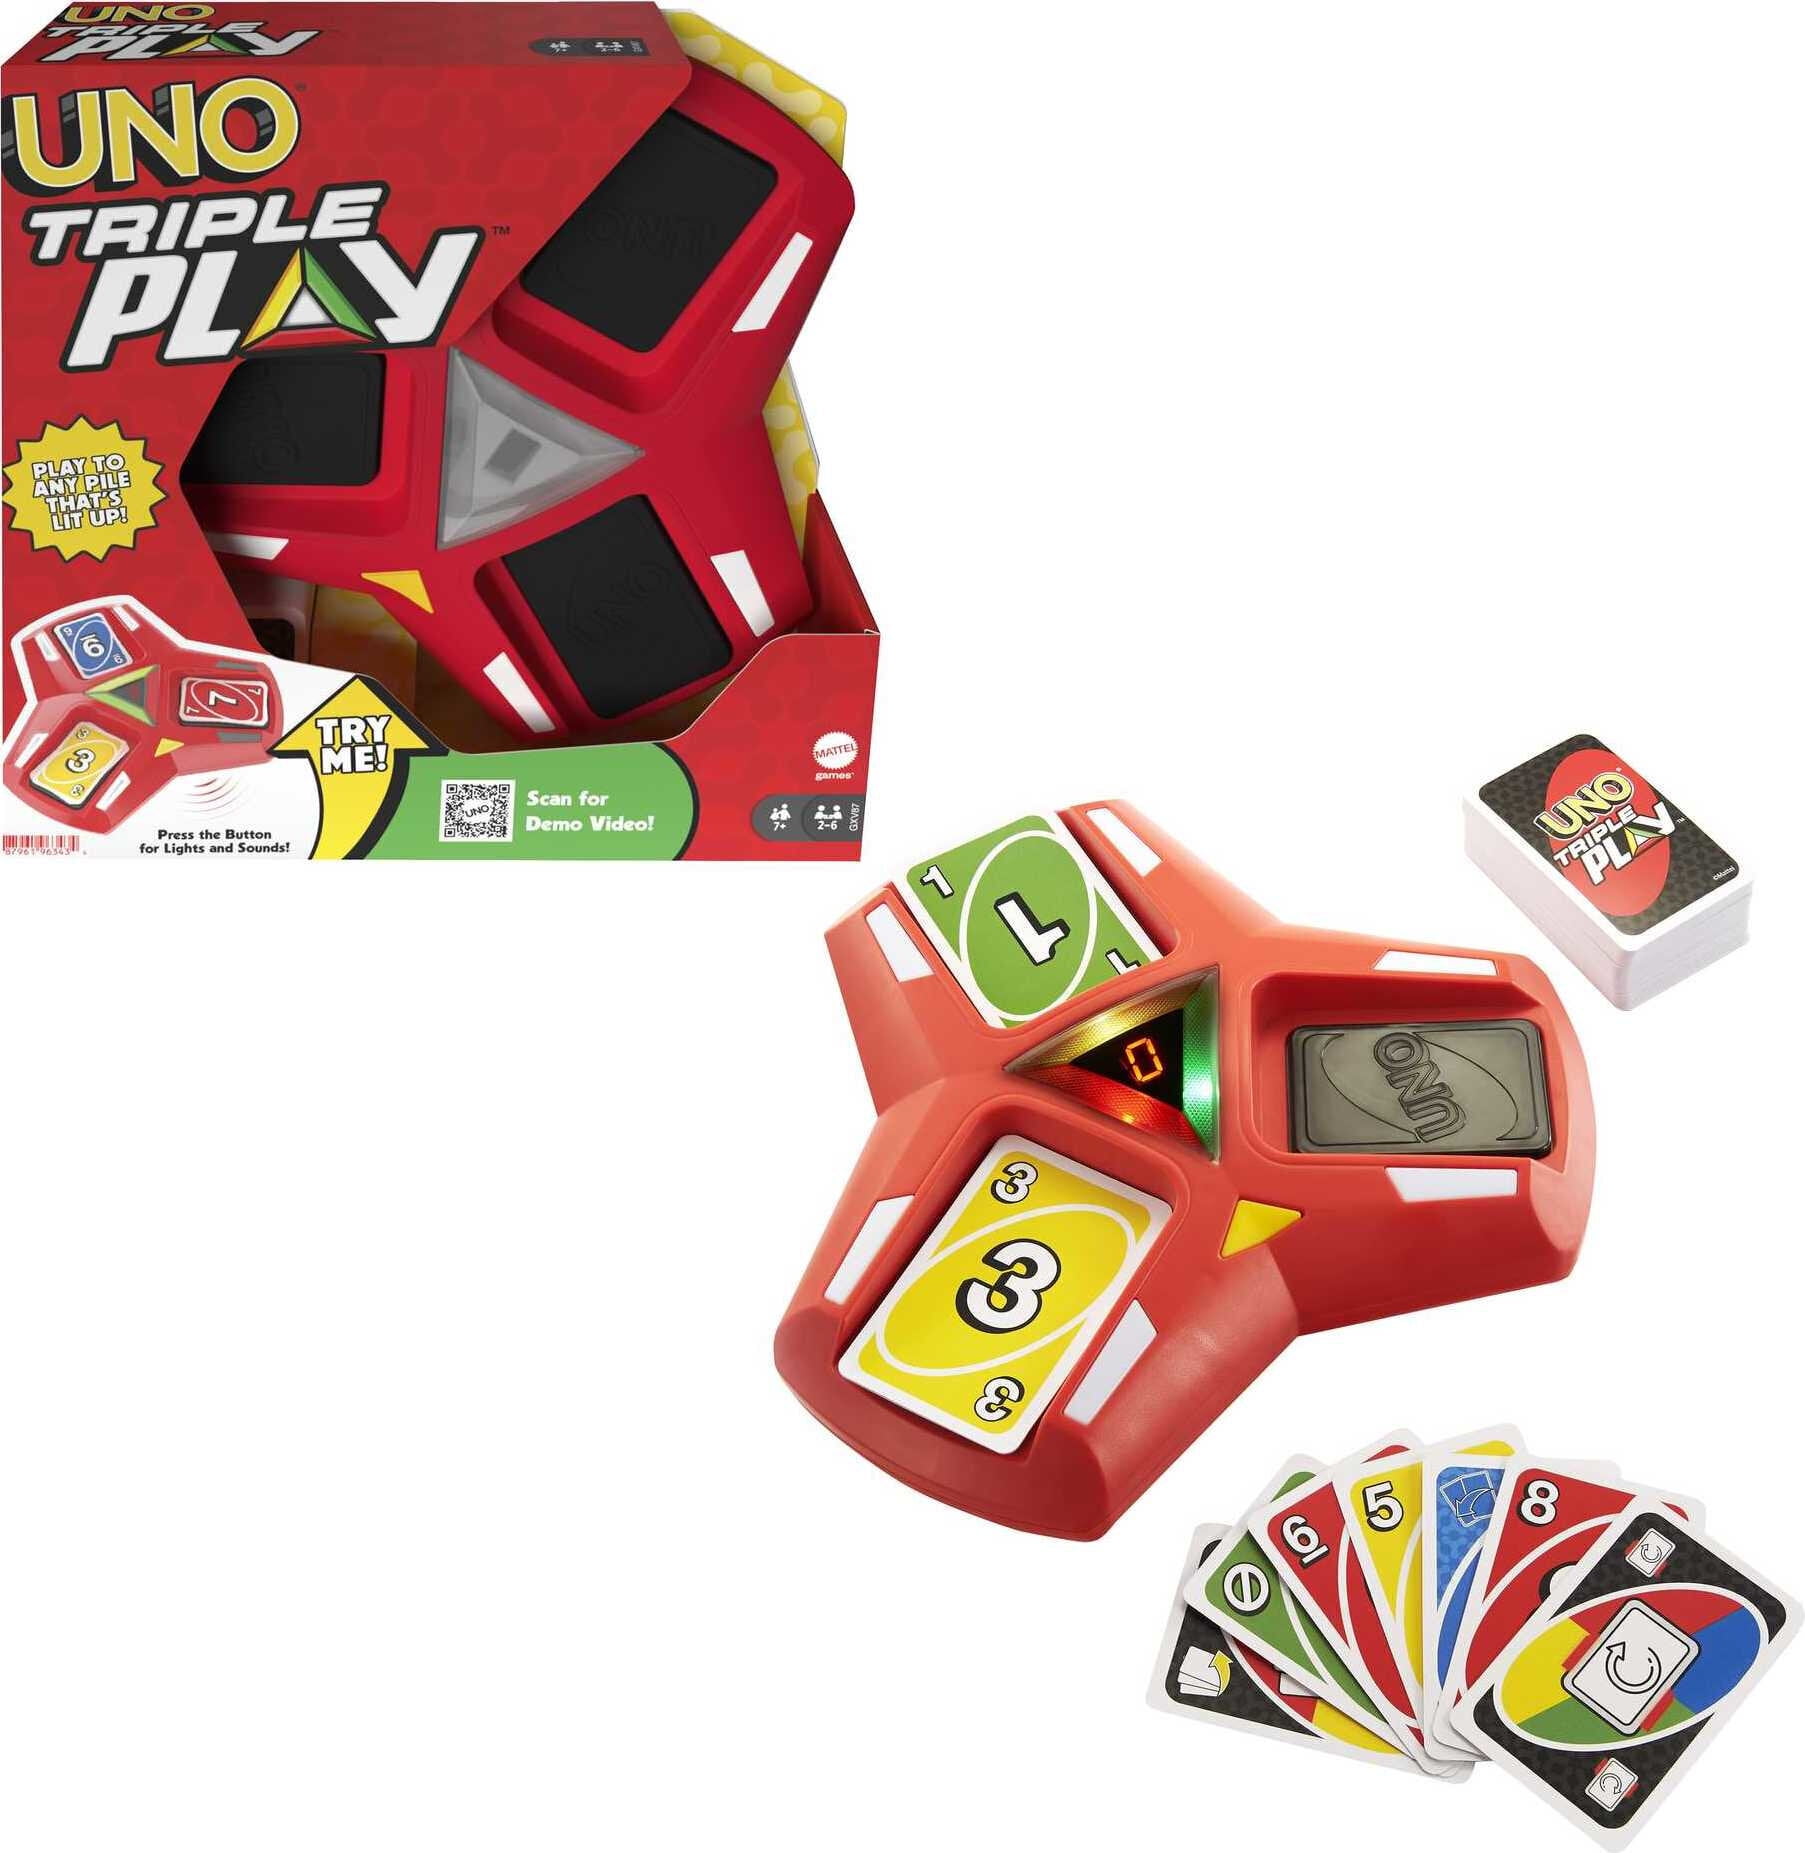 Mattel Games UNO Extreme, Family Card Game for Kids and Adults for